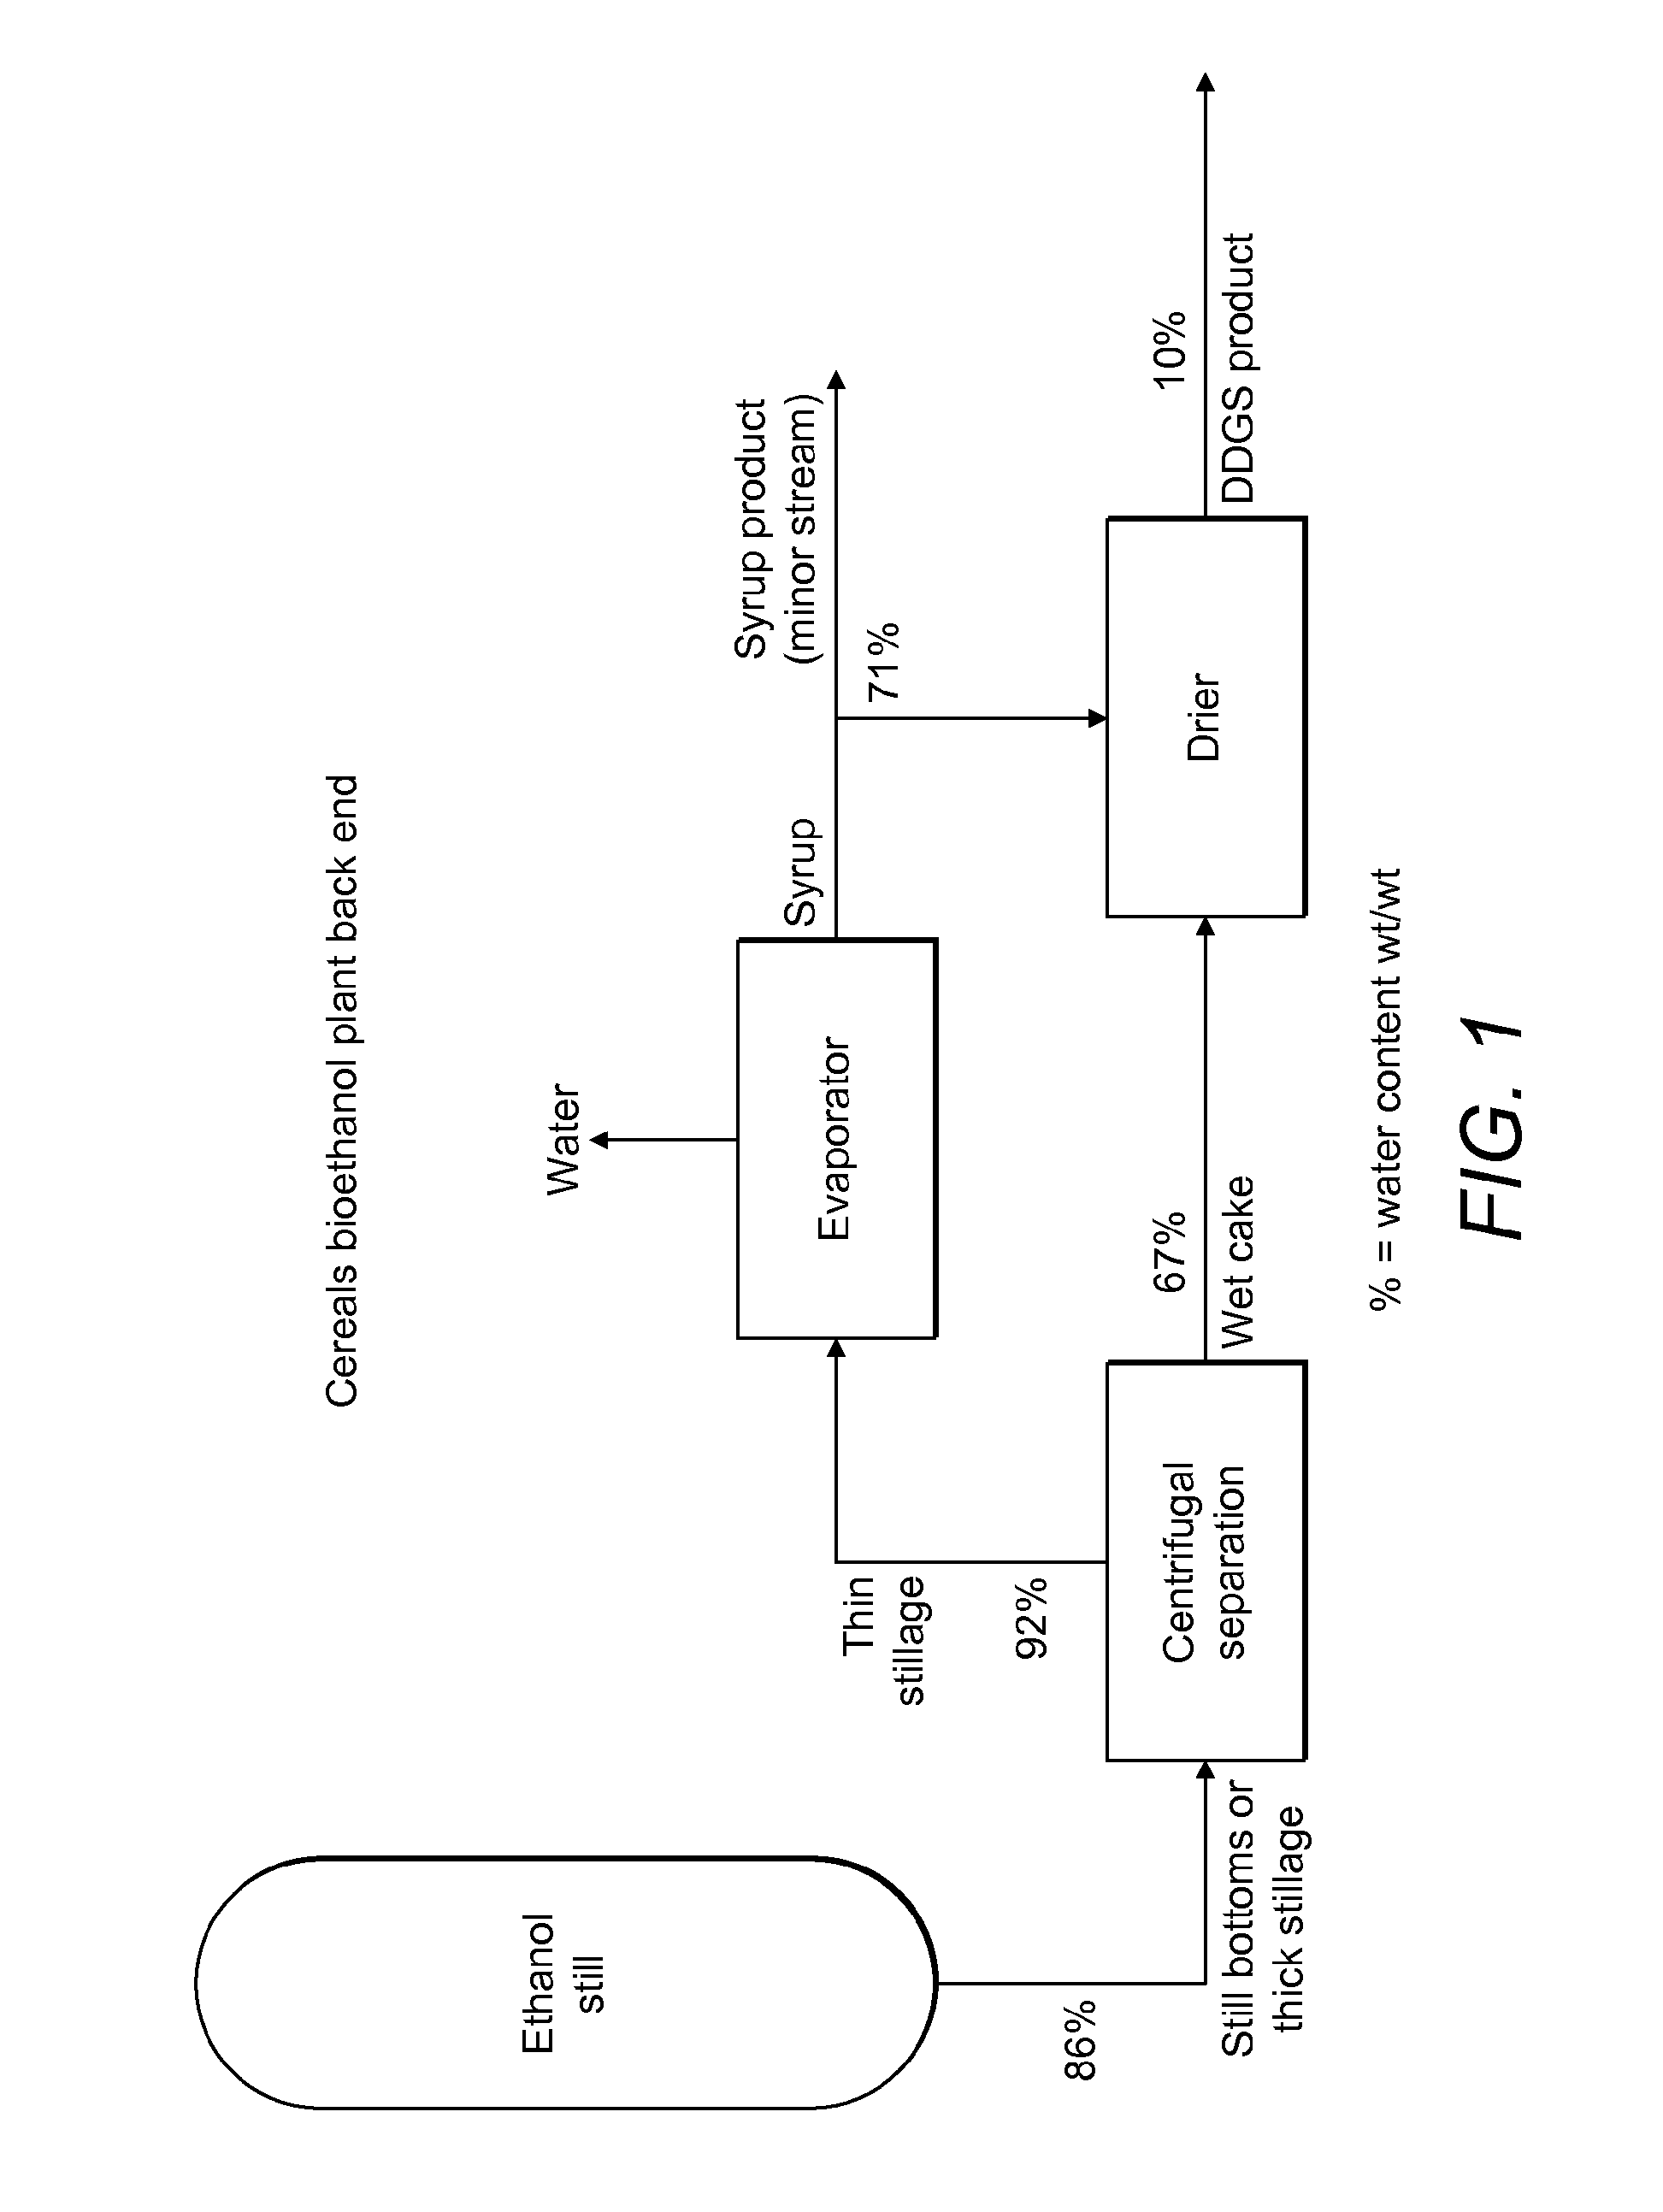 Hydrolysis and Fermentation Process for Animal Feed Production